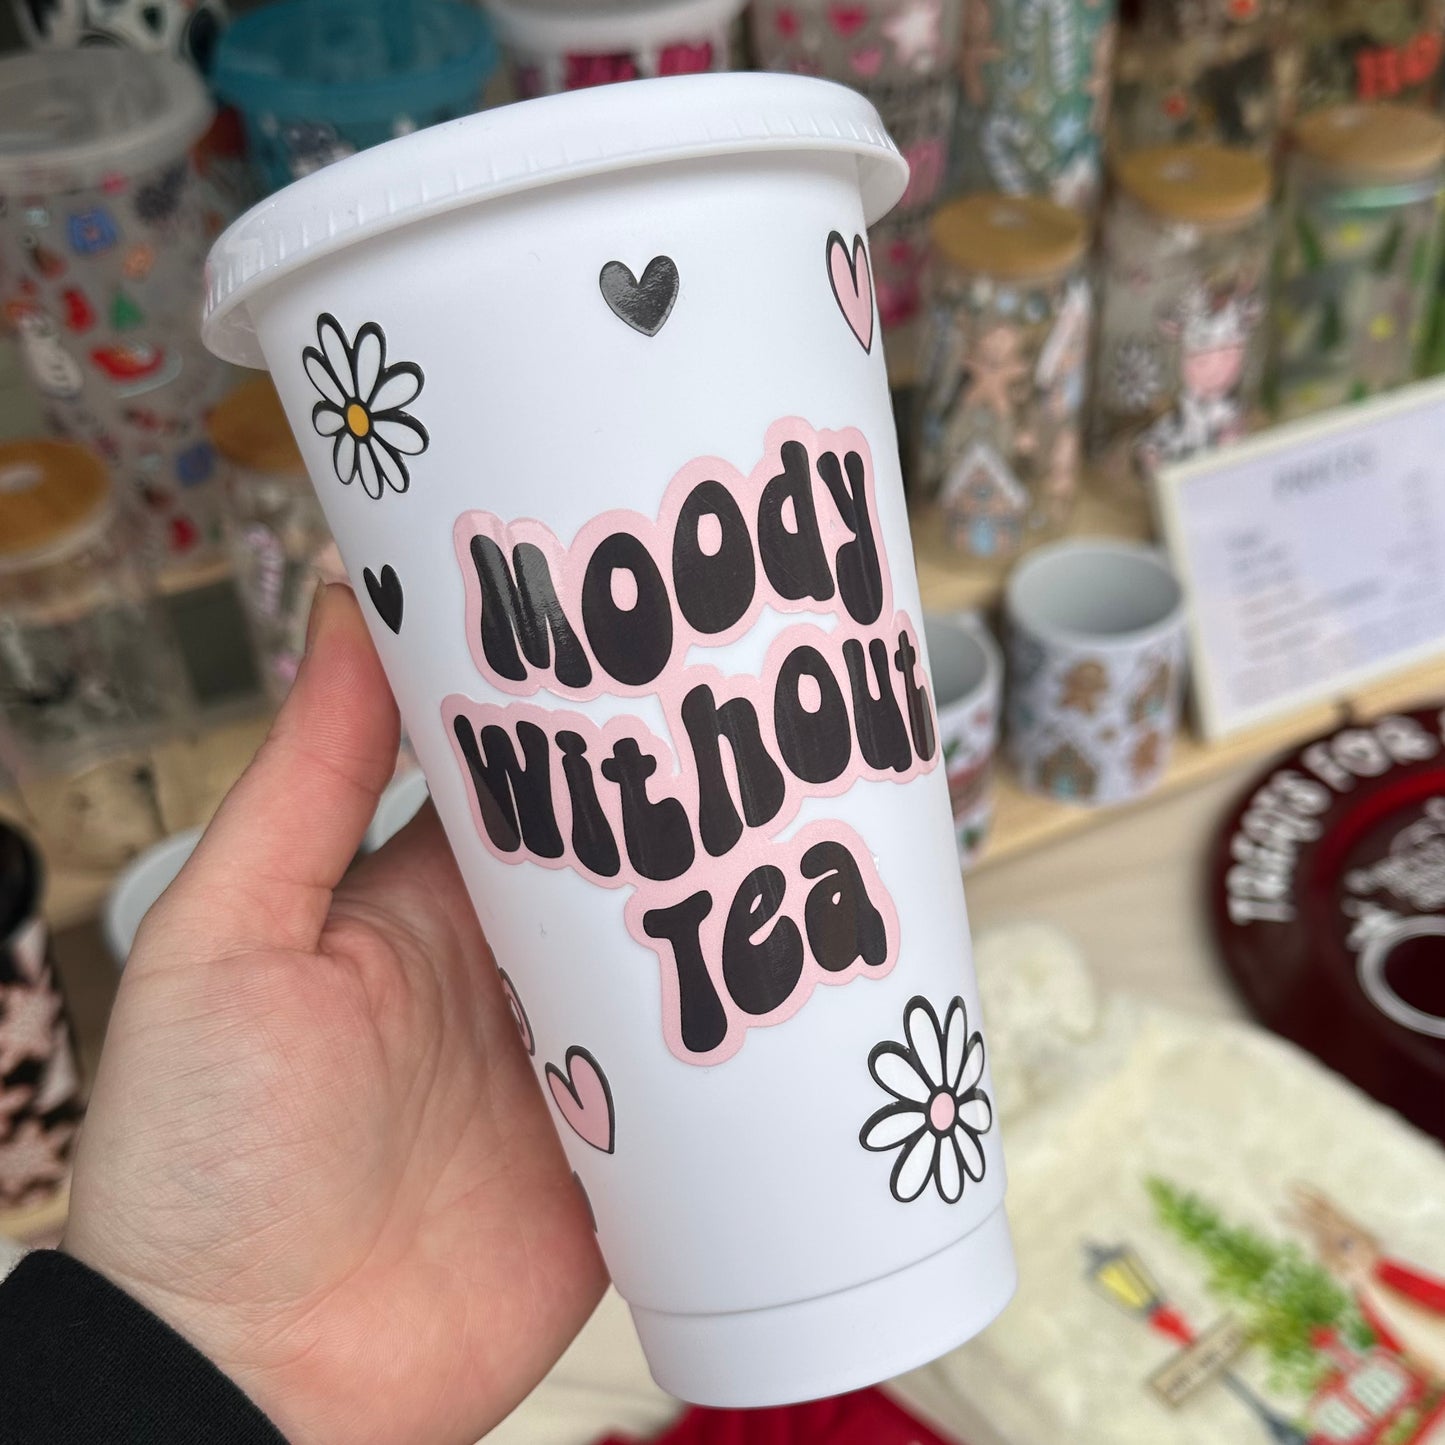 Moody without cold cup